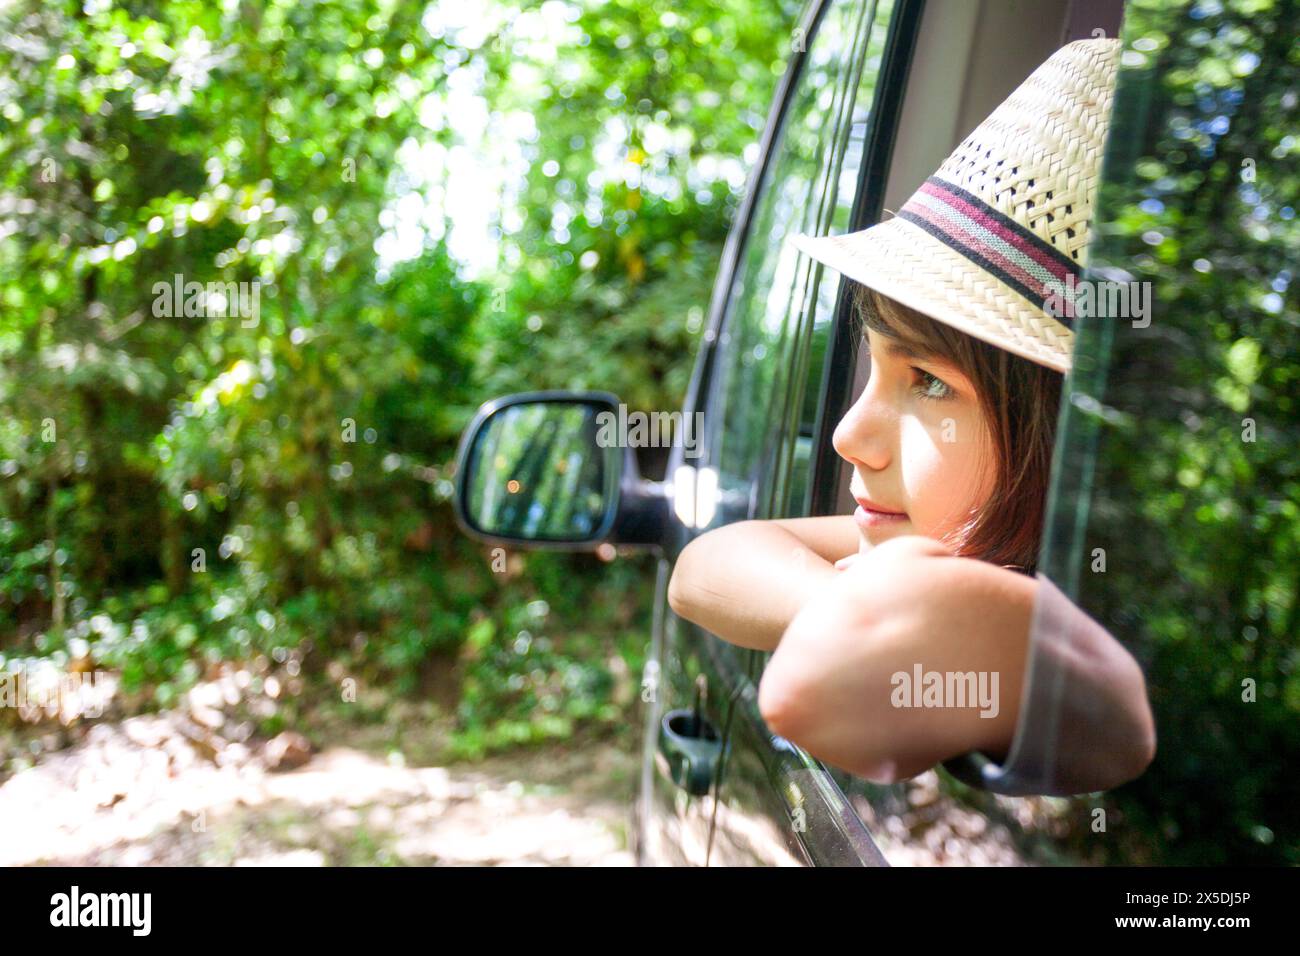 A young boy is looking out the window of a car. He is wearing a straw hat and has her arm out the window. The scene is peaceful and relaxing, as the b Stock Photo